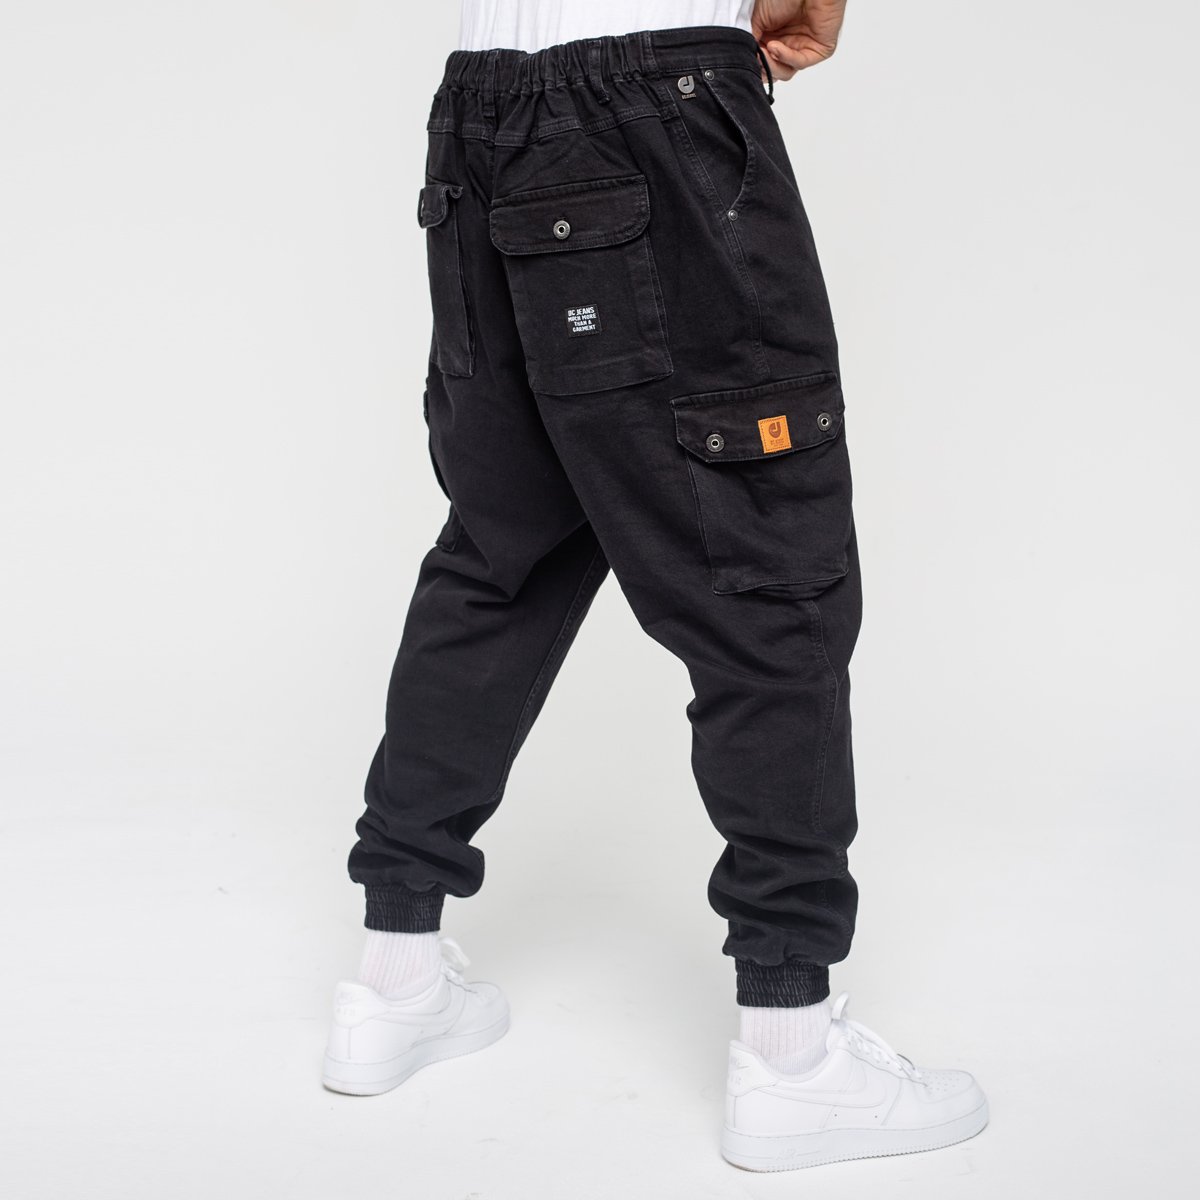 favorite wake jeans cargo multi pocket contrast stitching cream hq canvas  baggy style pants w 32' / L 45' m 600 s 700 g 800 | Instagram